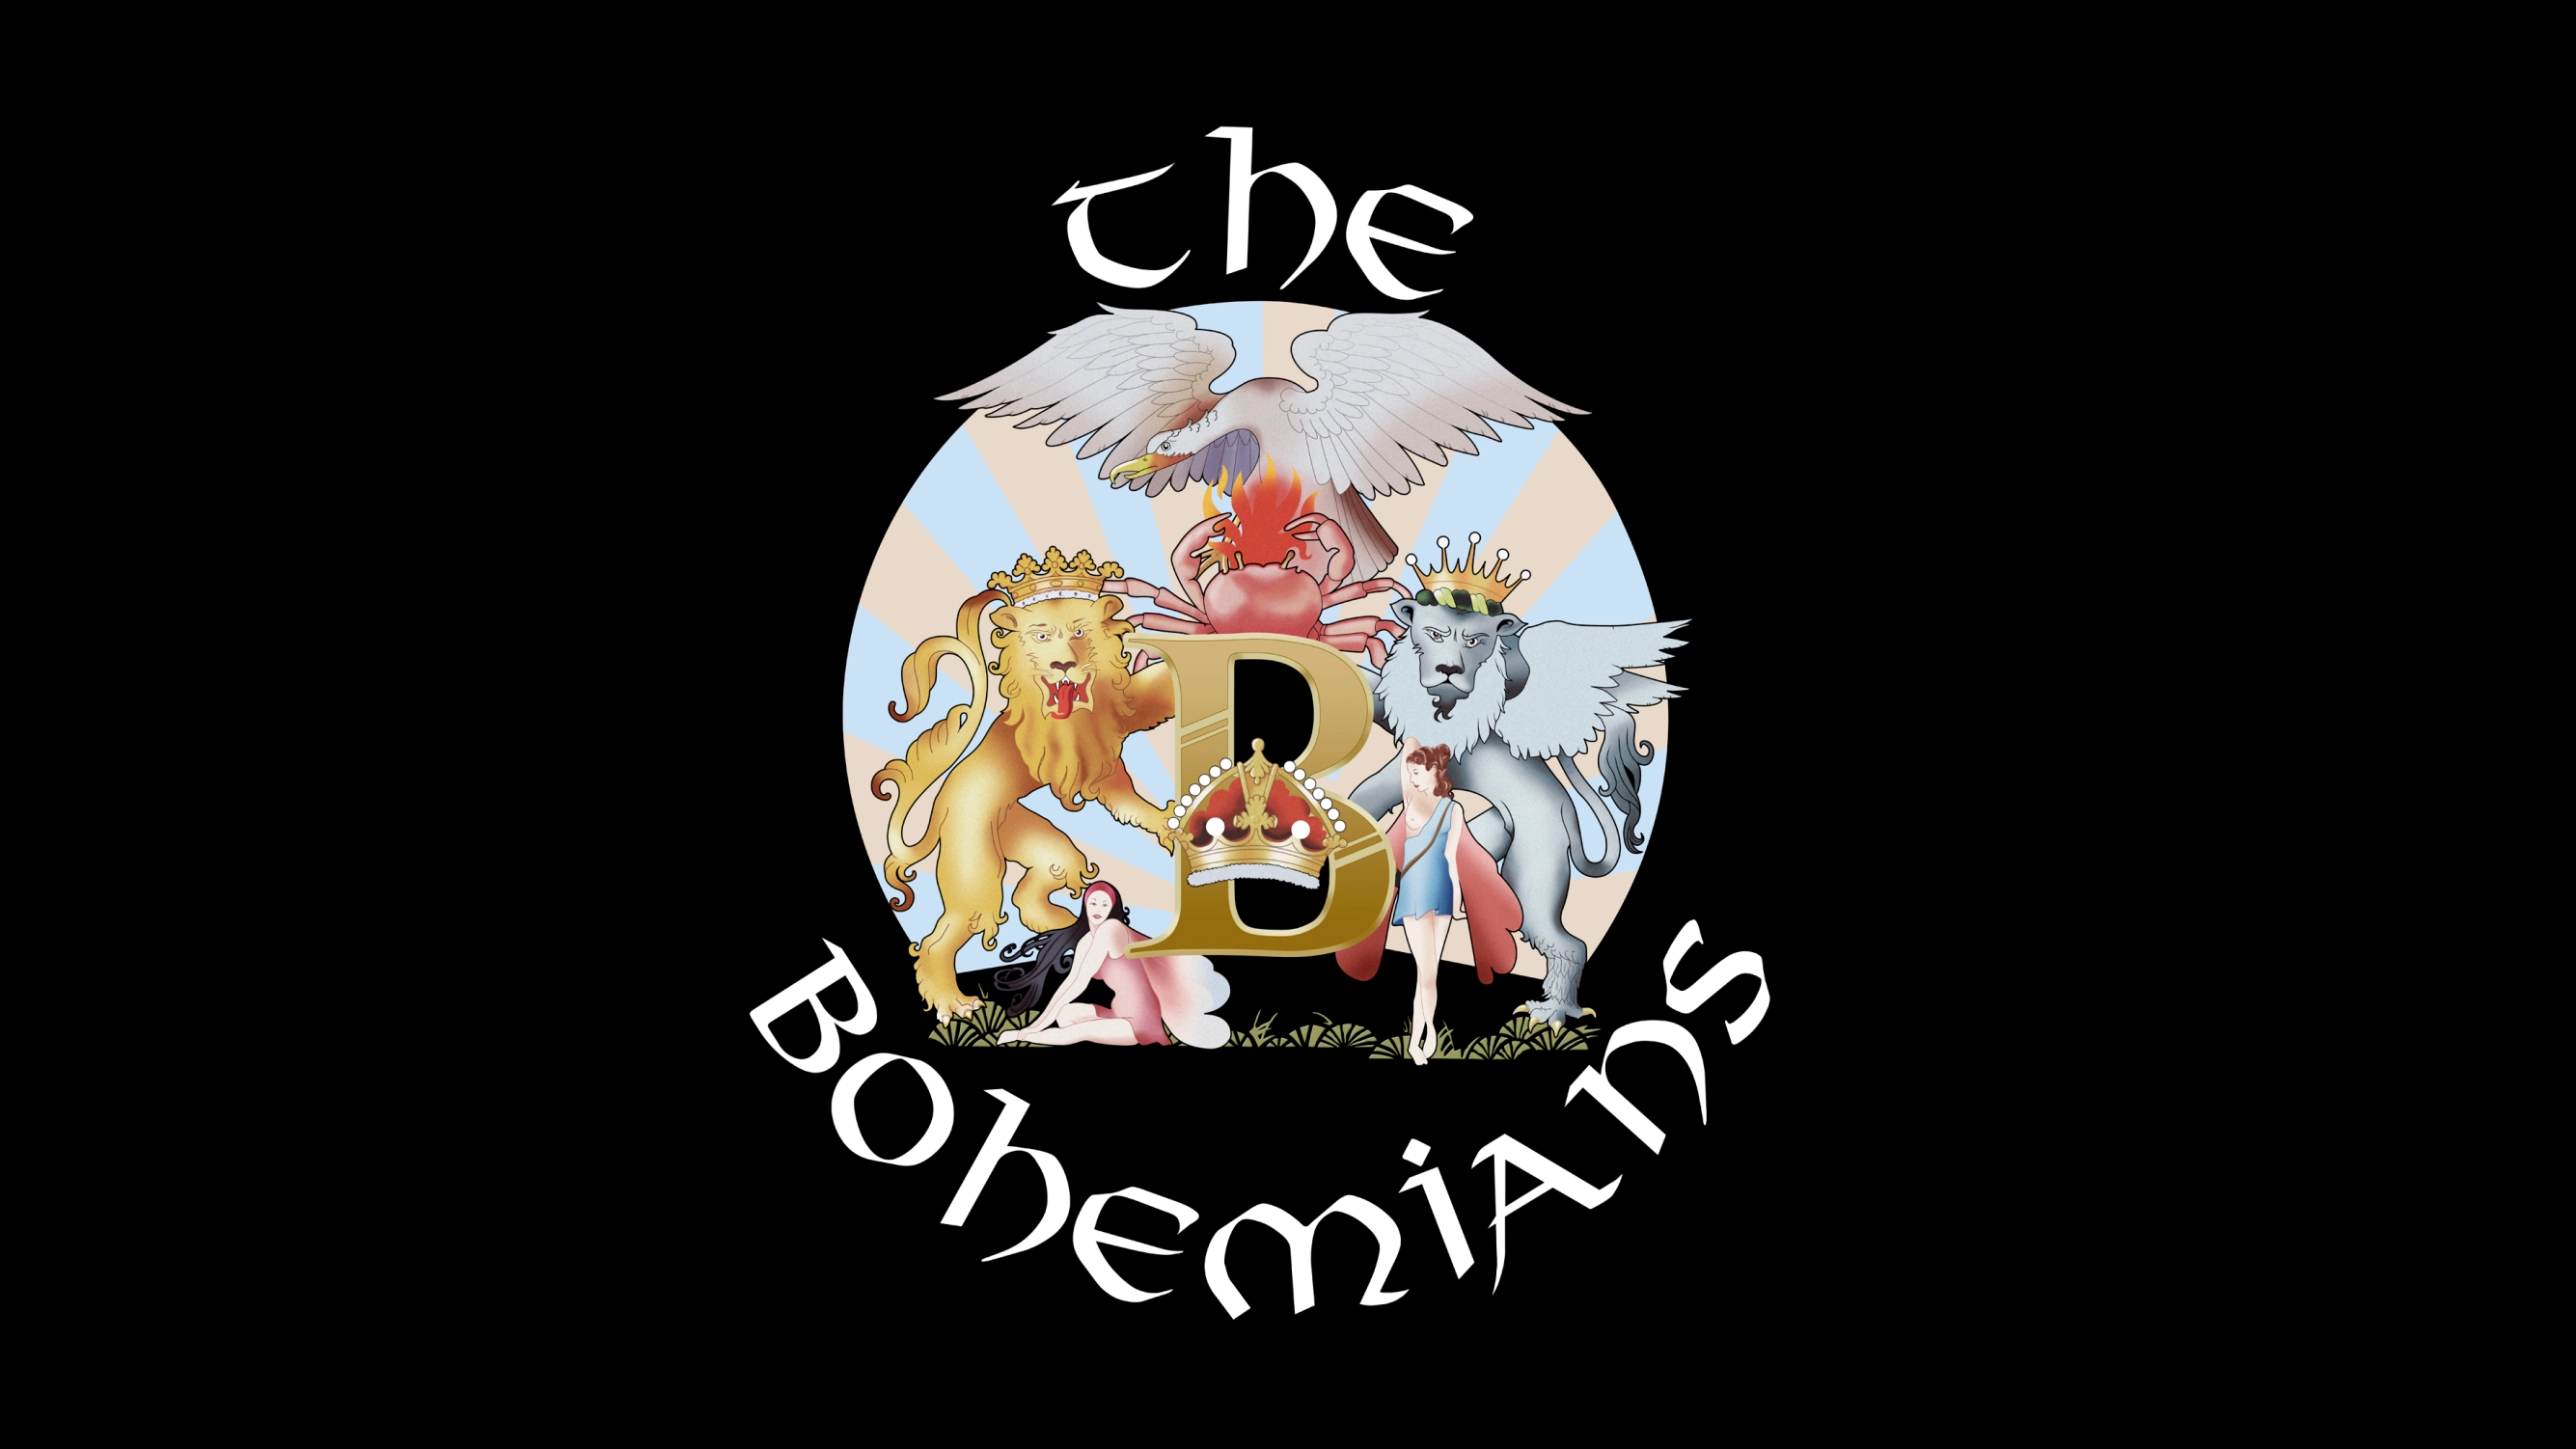 Queen's Greatest Hits with The Bohemians